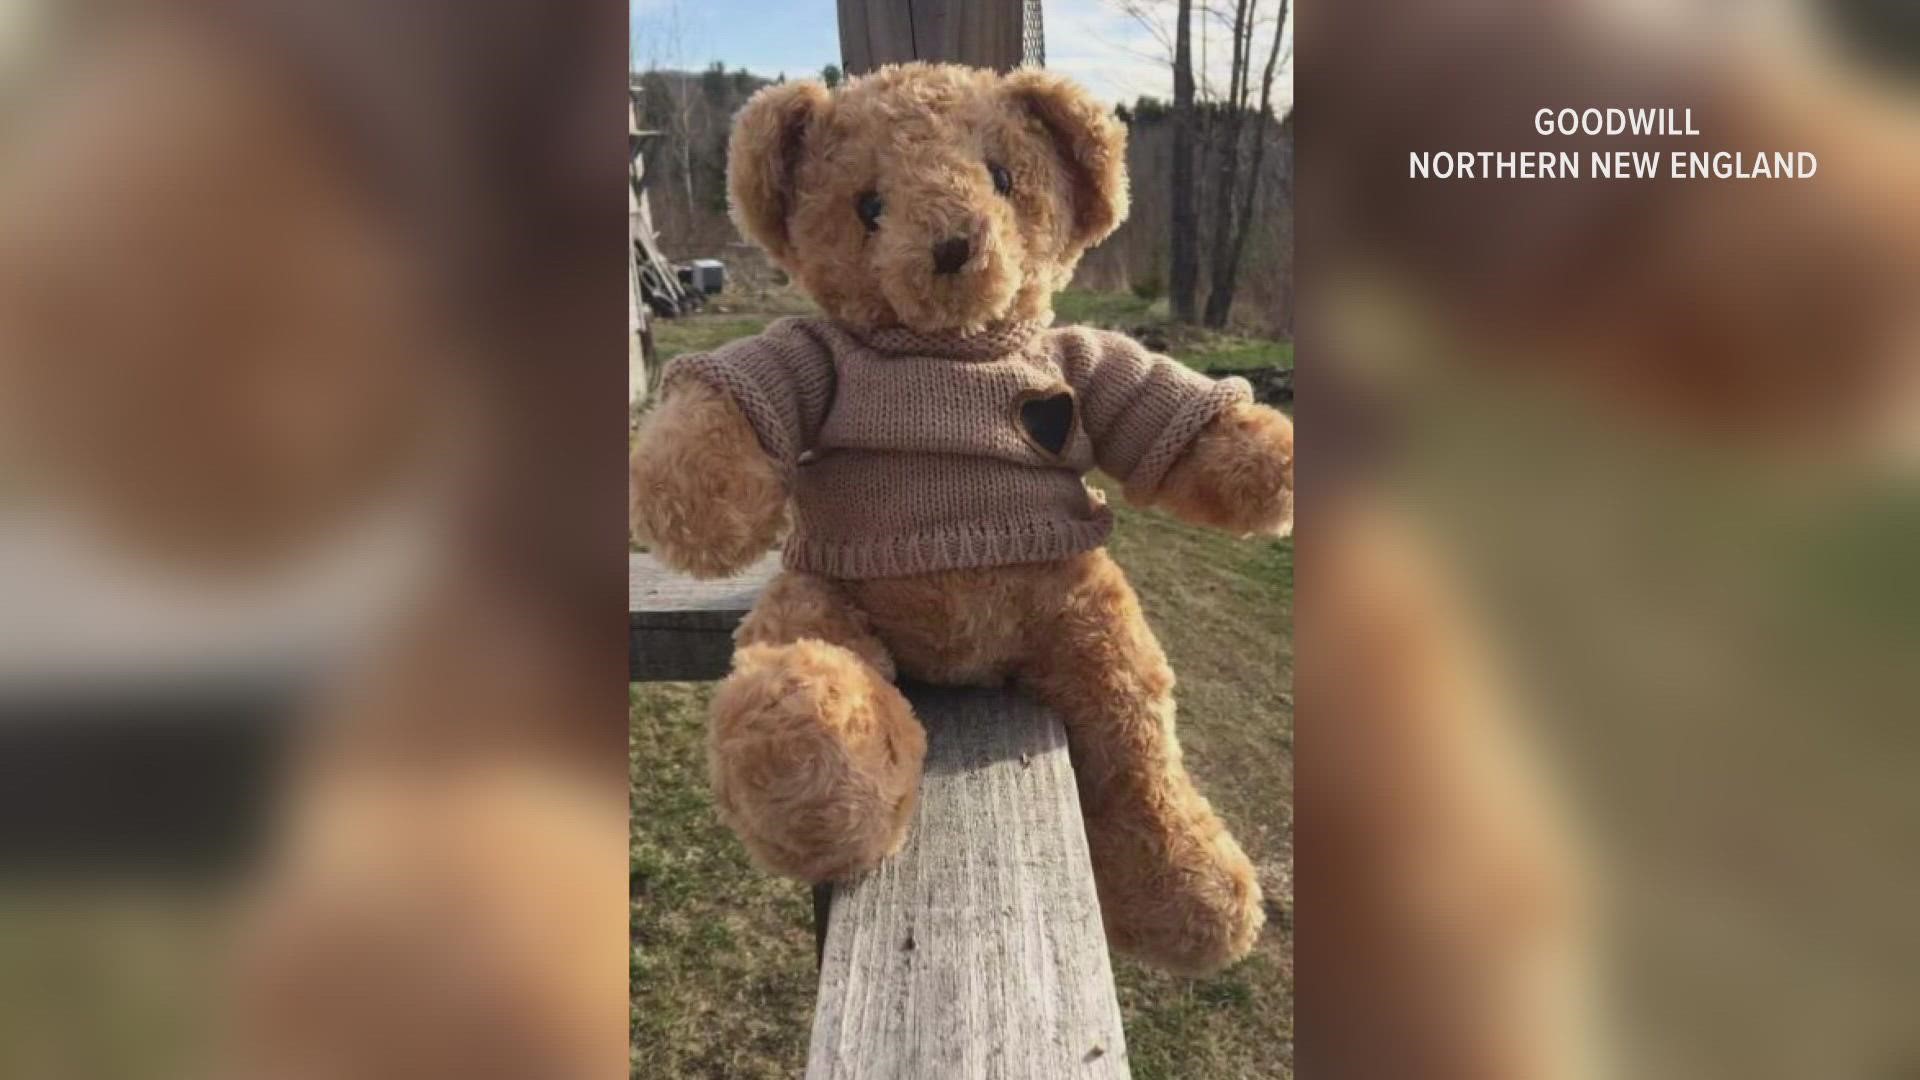 The teddy bear's former owner reached out to Goodwill noting the special bear contains a bag of his son's ashes, according to a Facebook post.